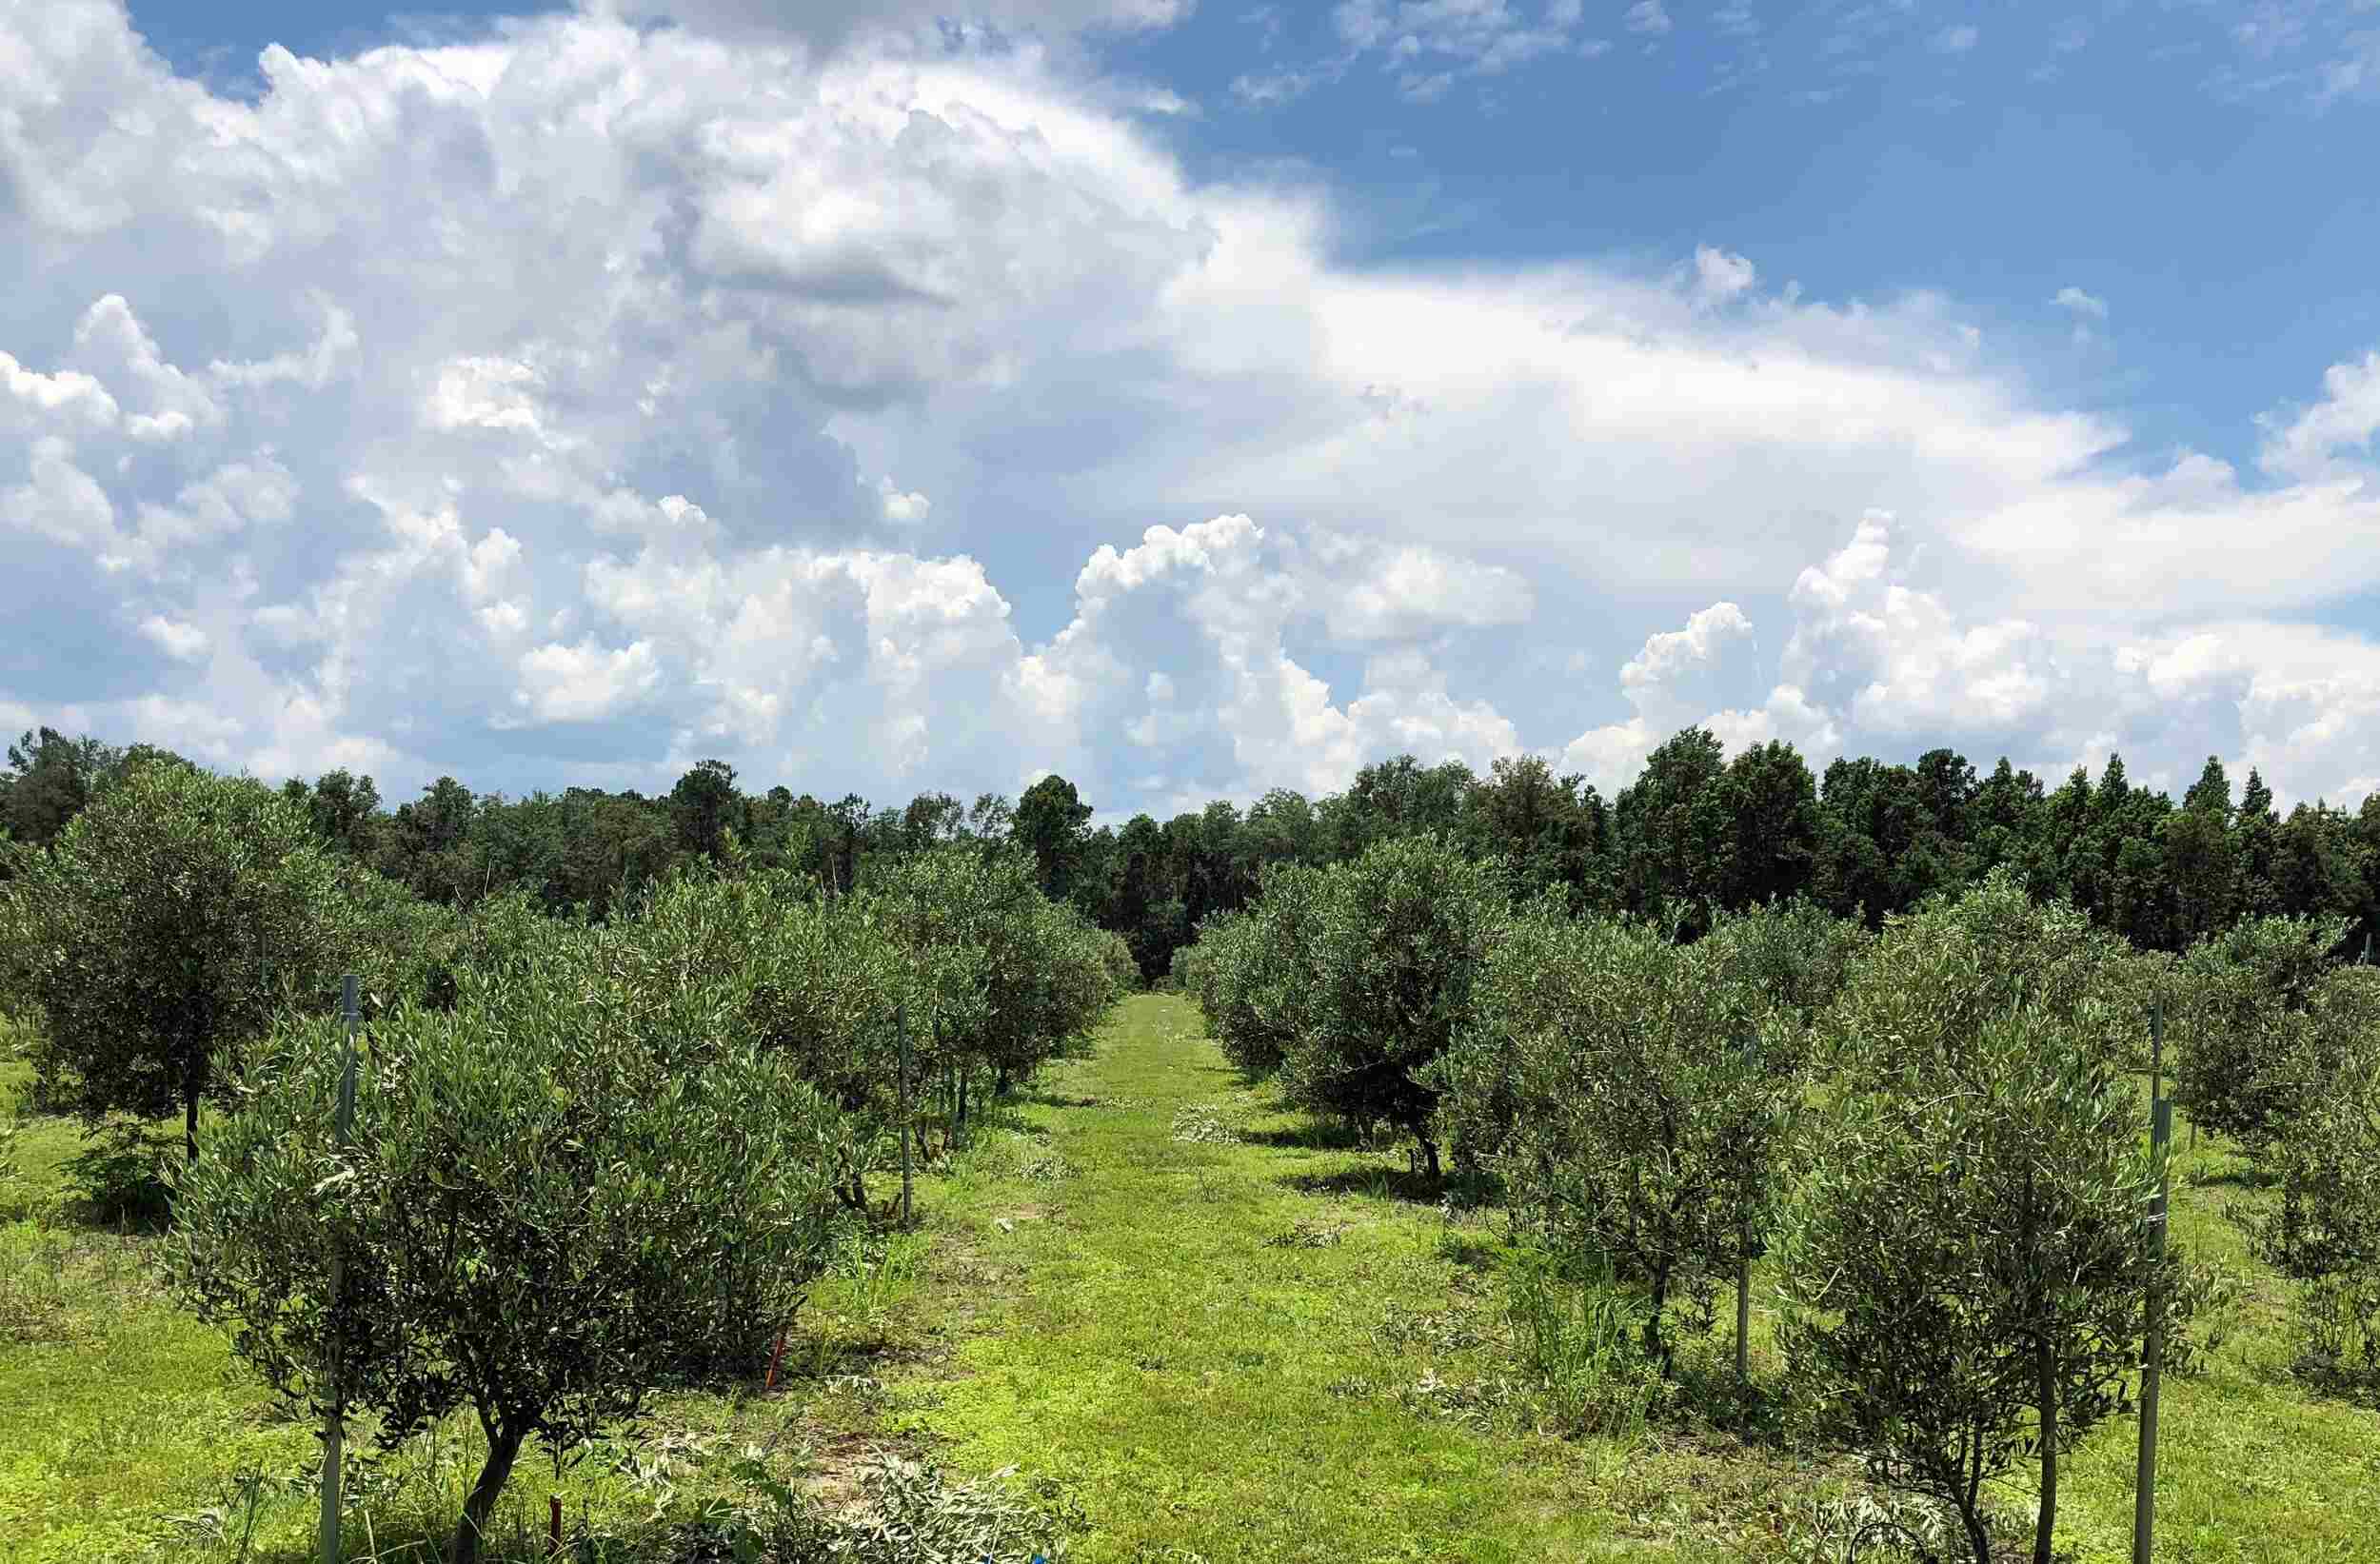 What Orchard Layout Is Recommended For Planting An Olive Orchard In Louisiana